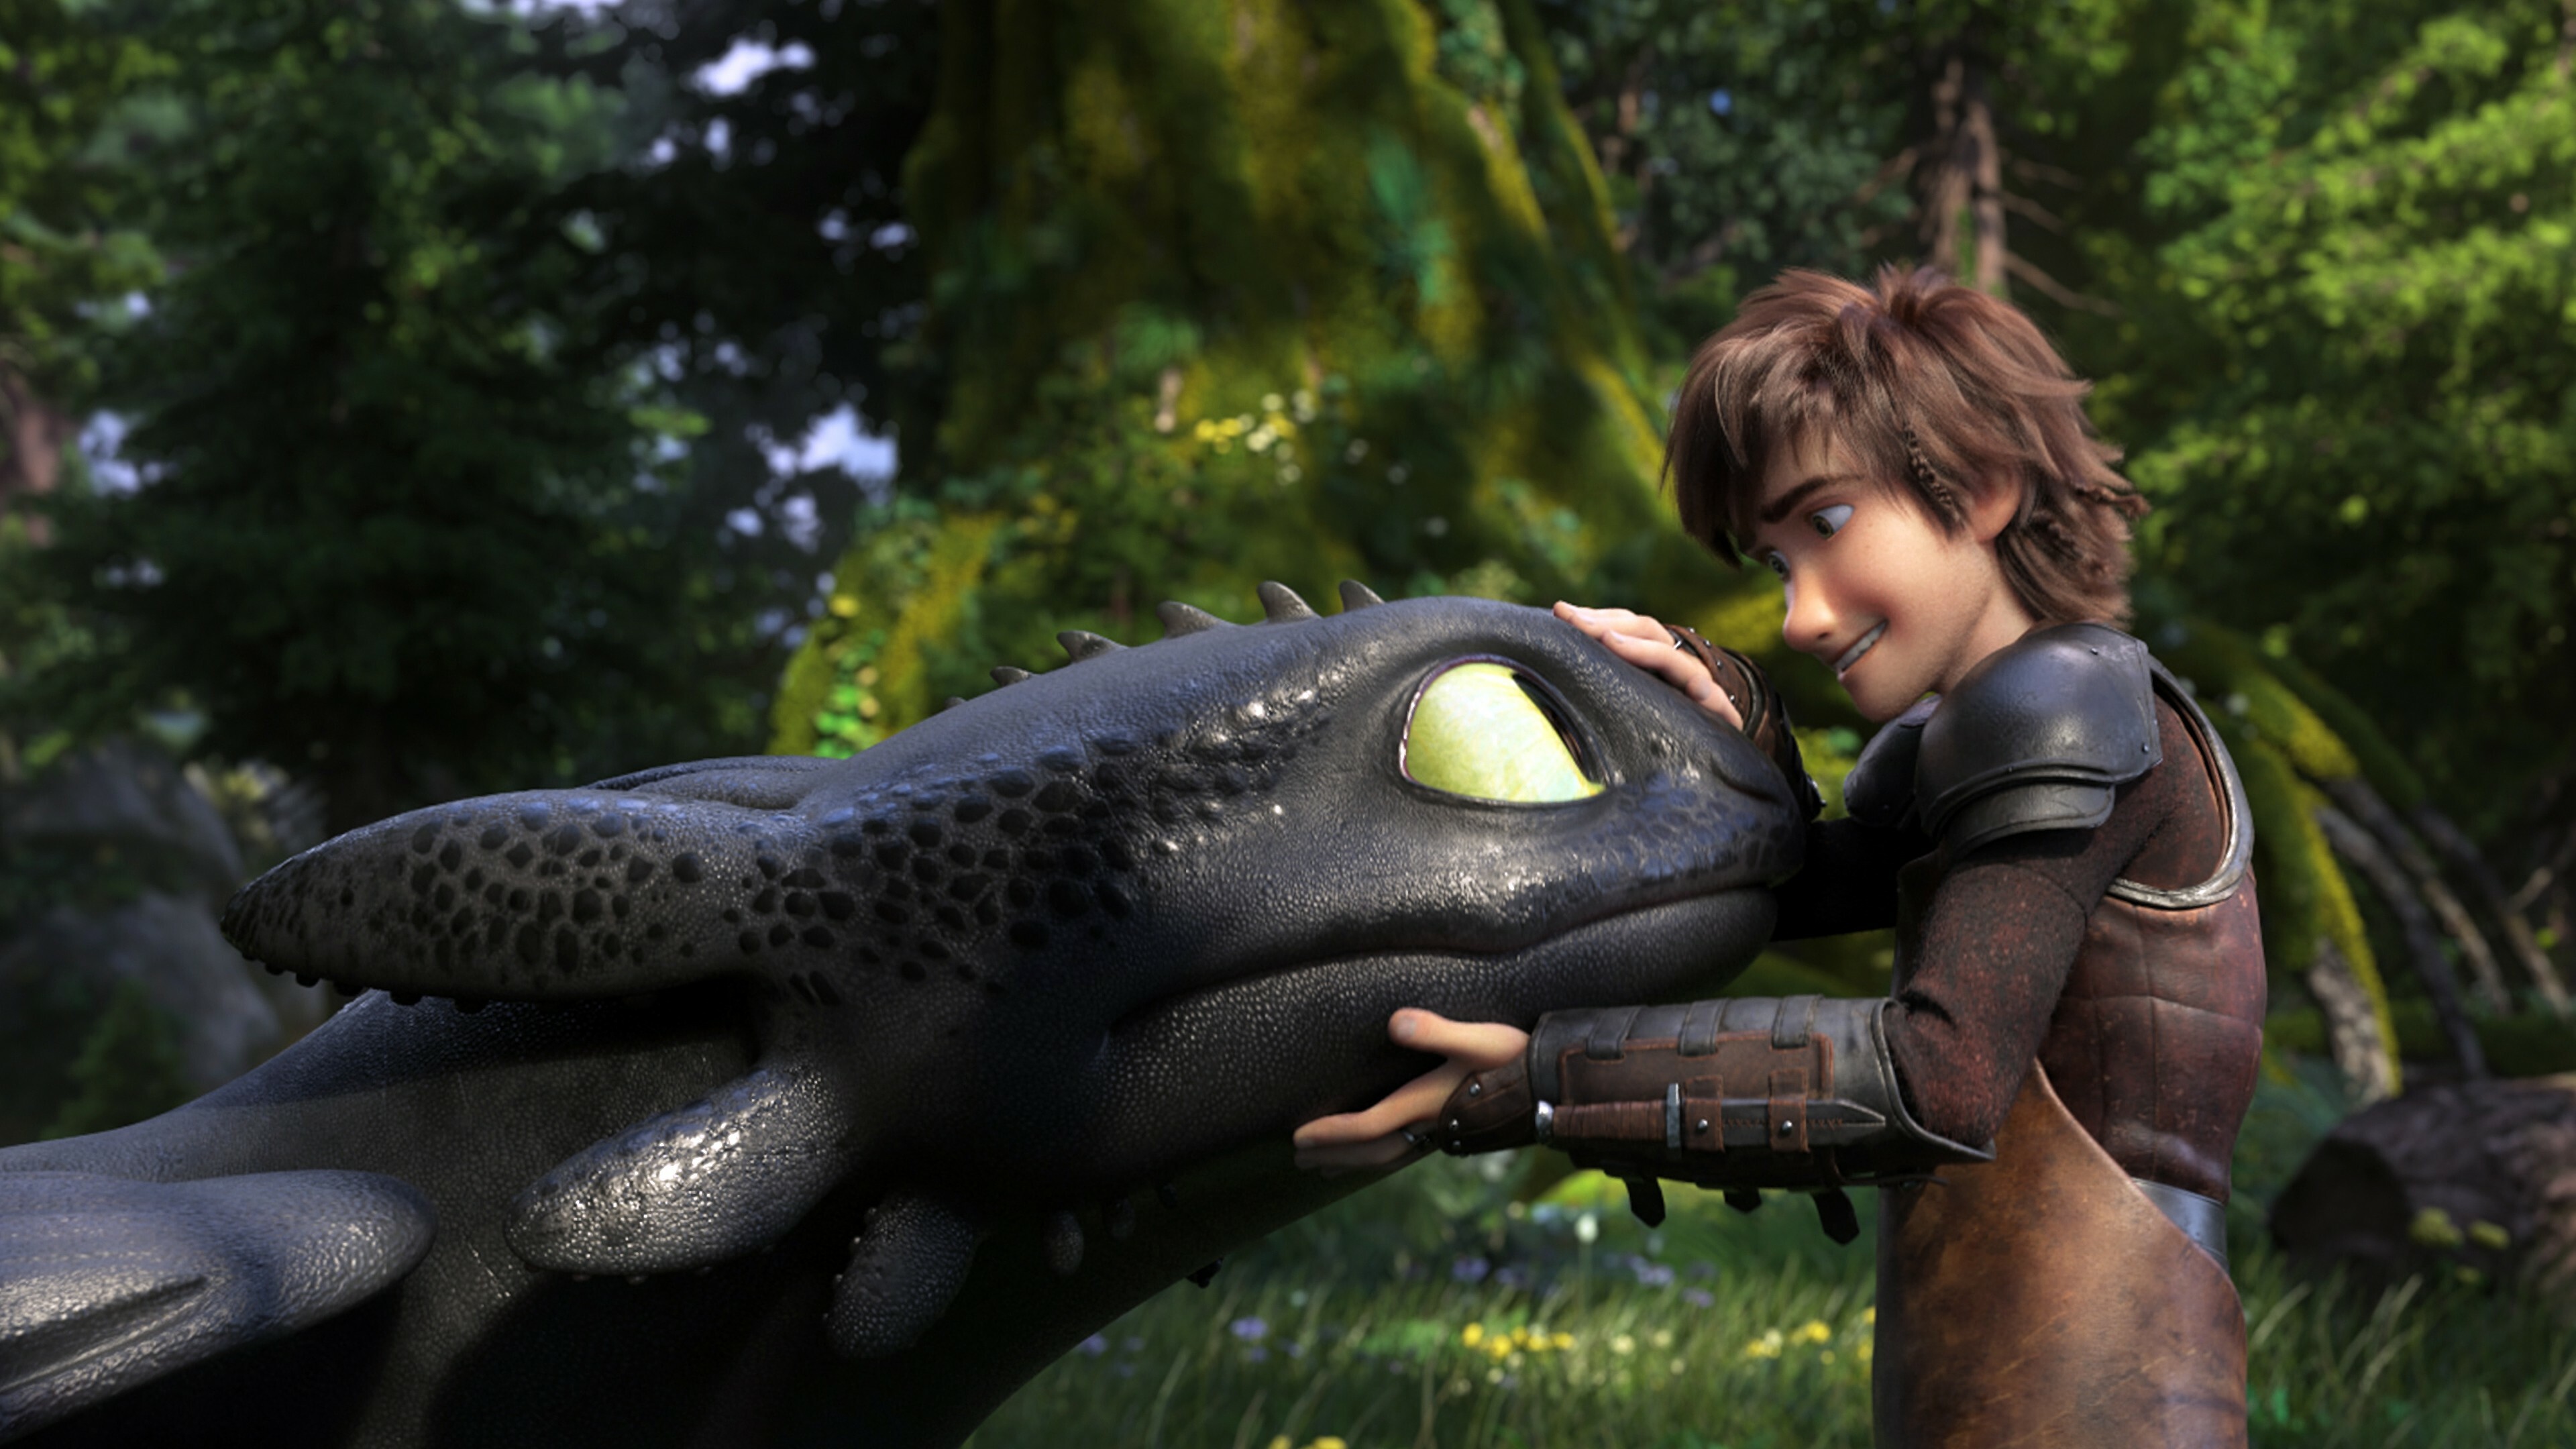 Hiccup and Toothless, How to Train Your Dragon Wallpaper, 3840x2160 4K Desktop